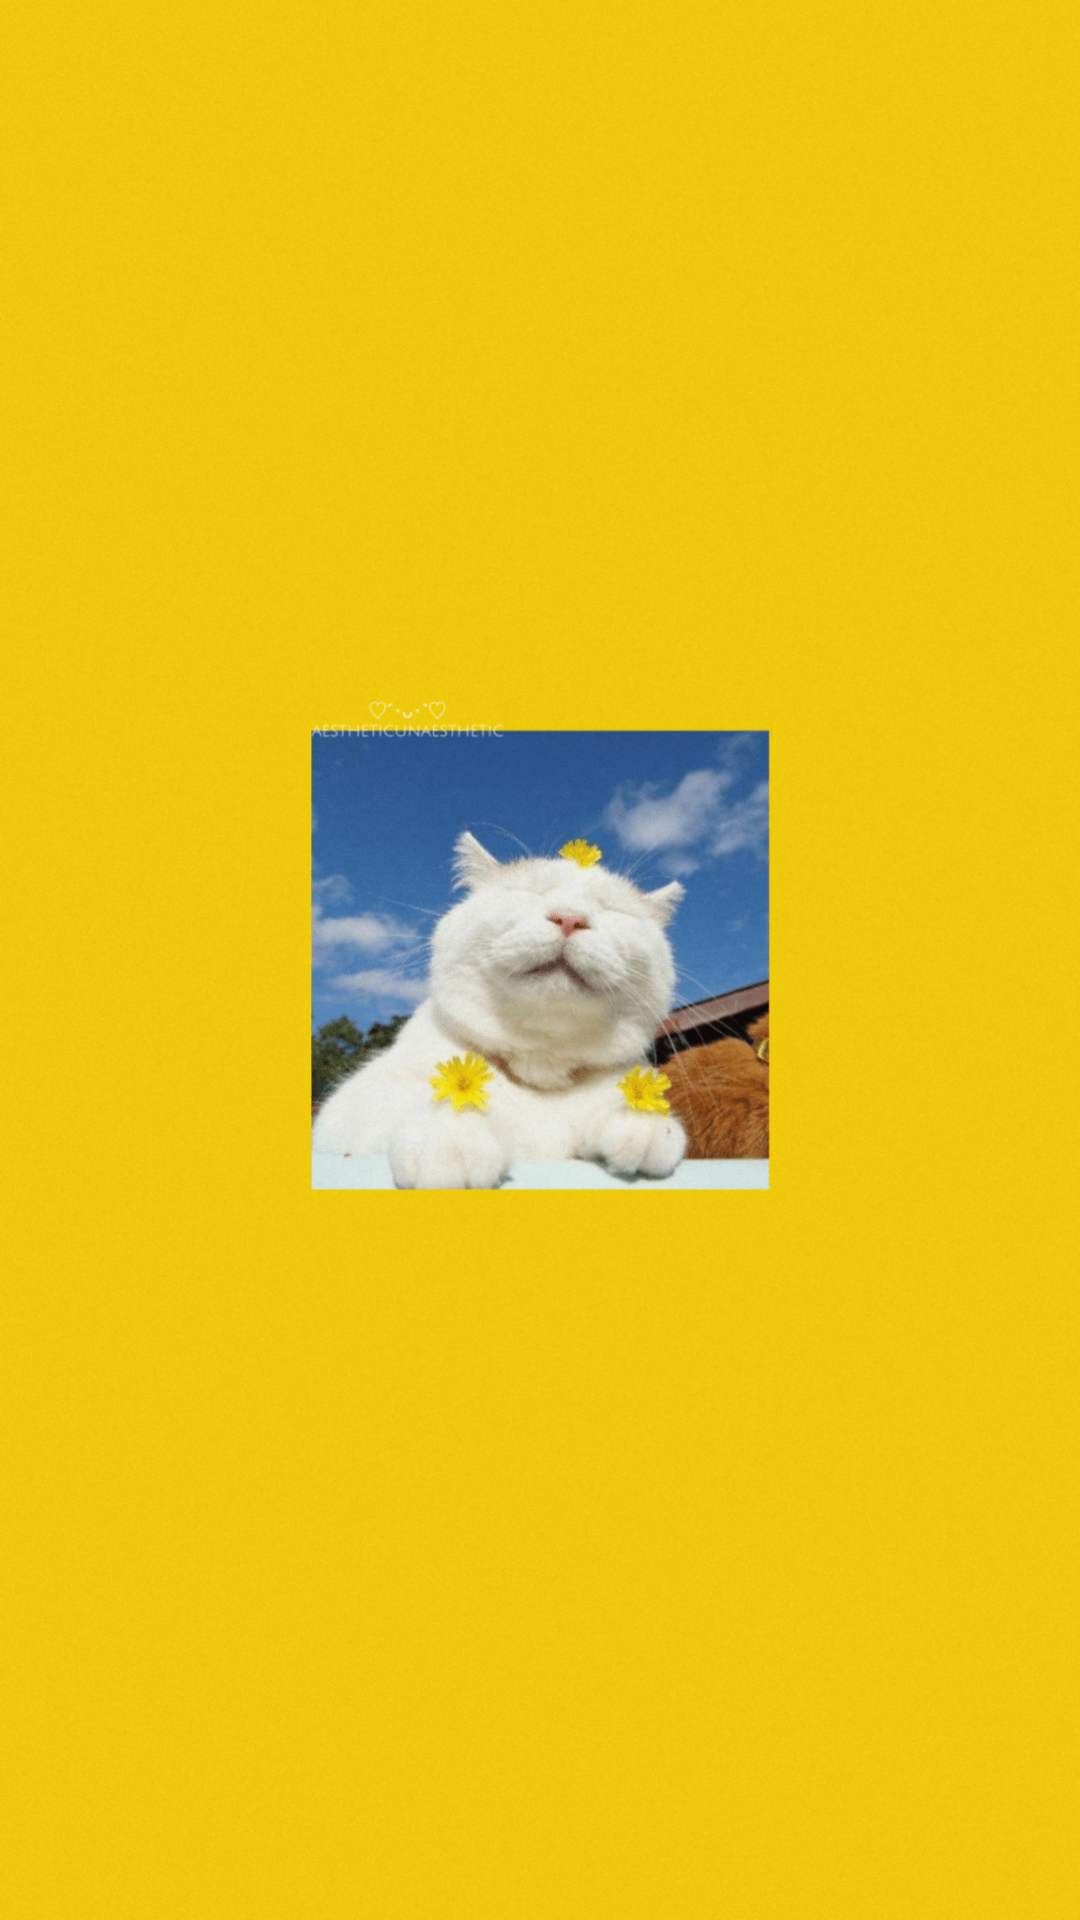 Aesthetic wallpaper of a white cat with yellow flowers on a yellow background - Cat